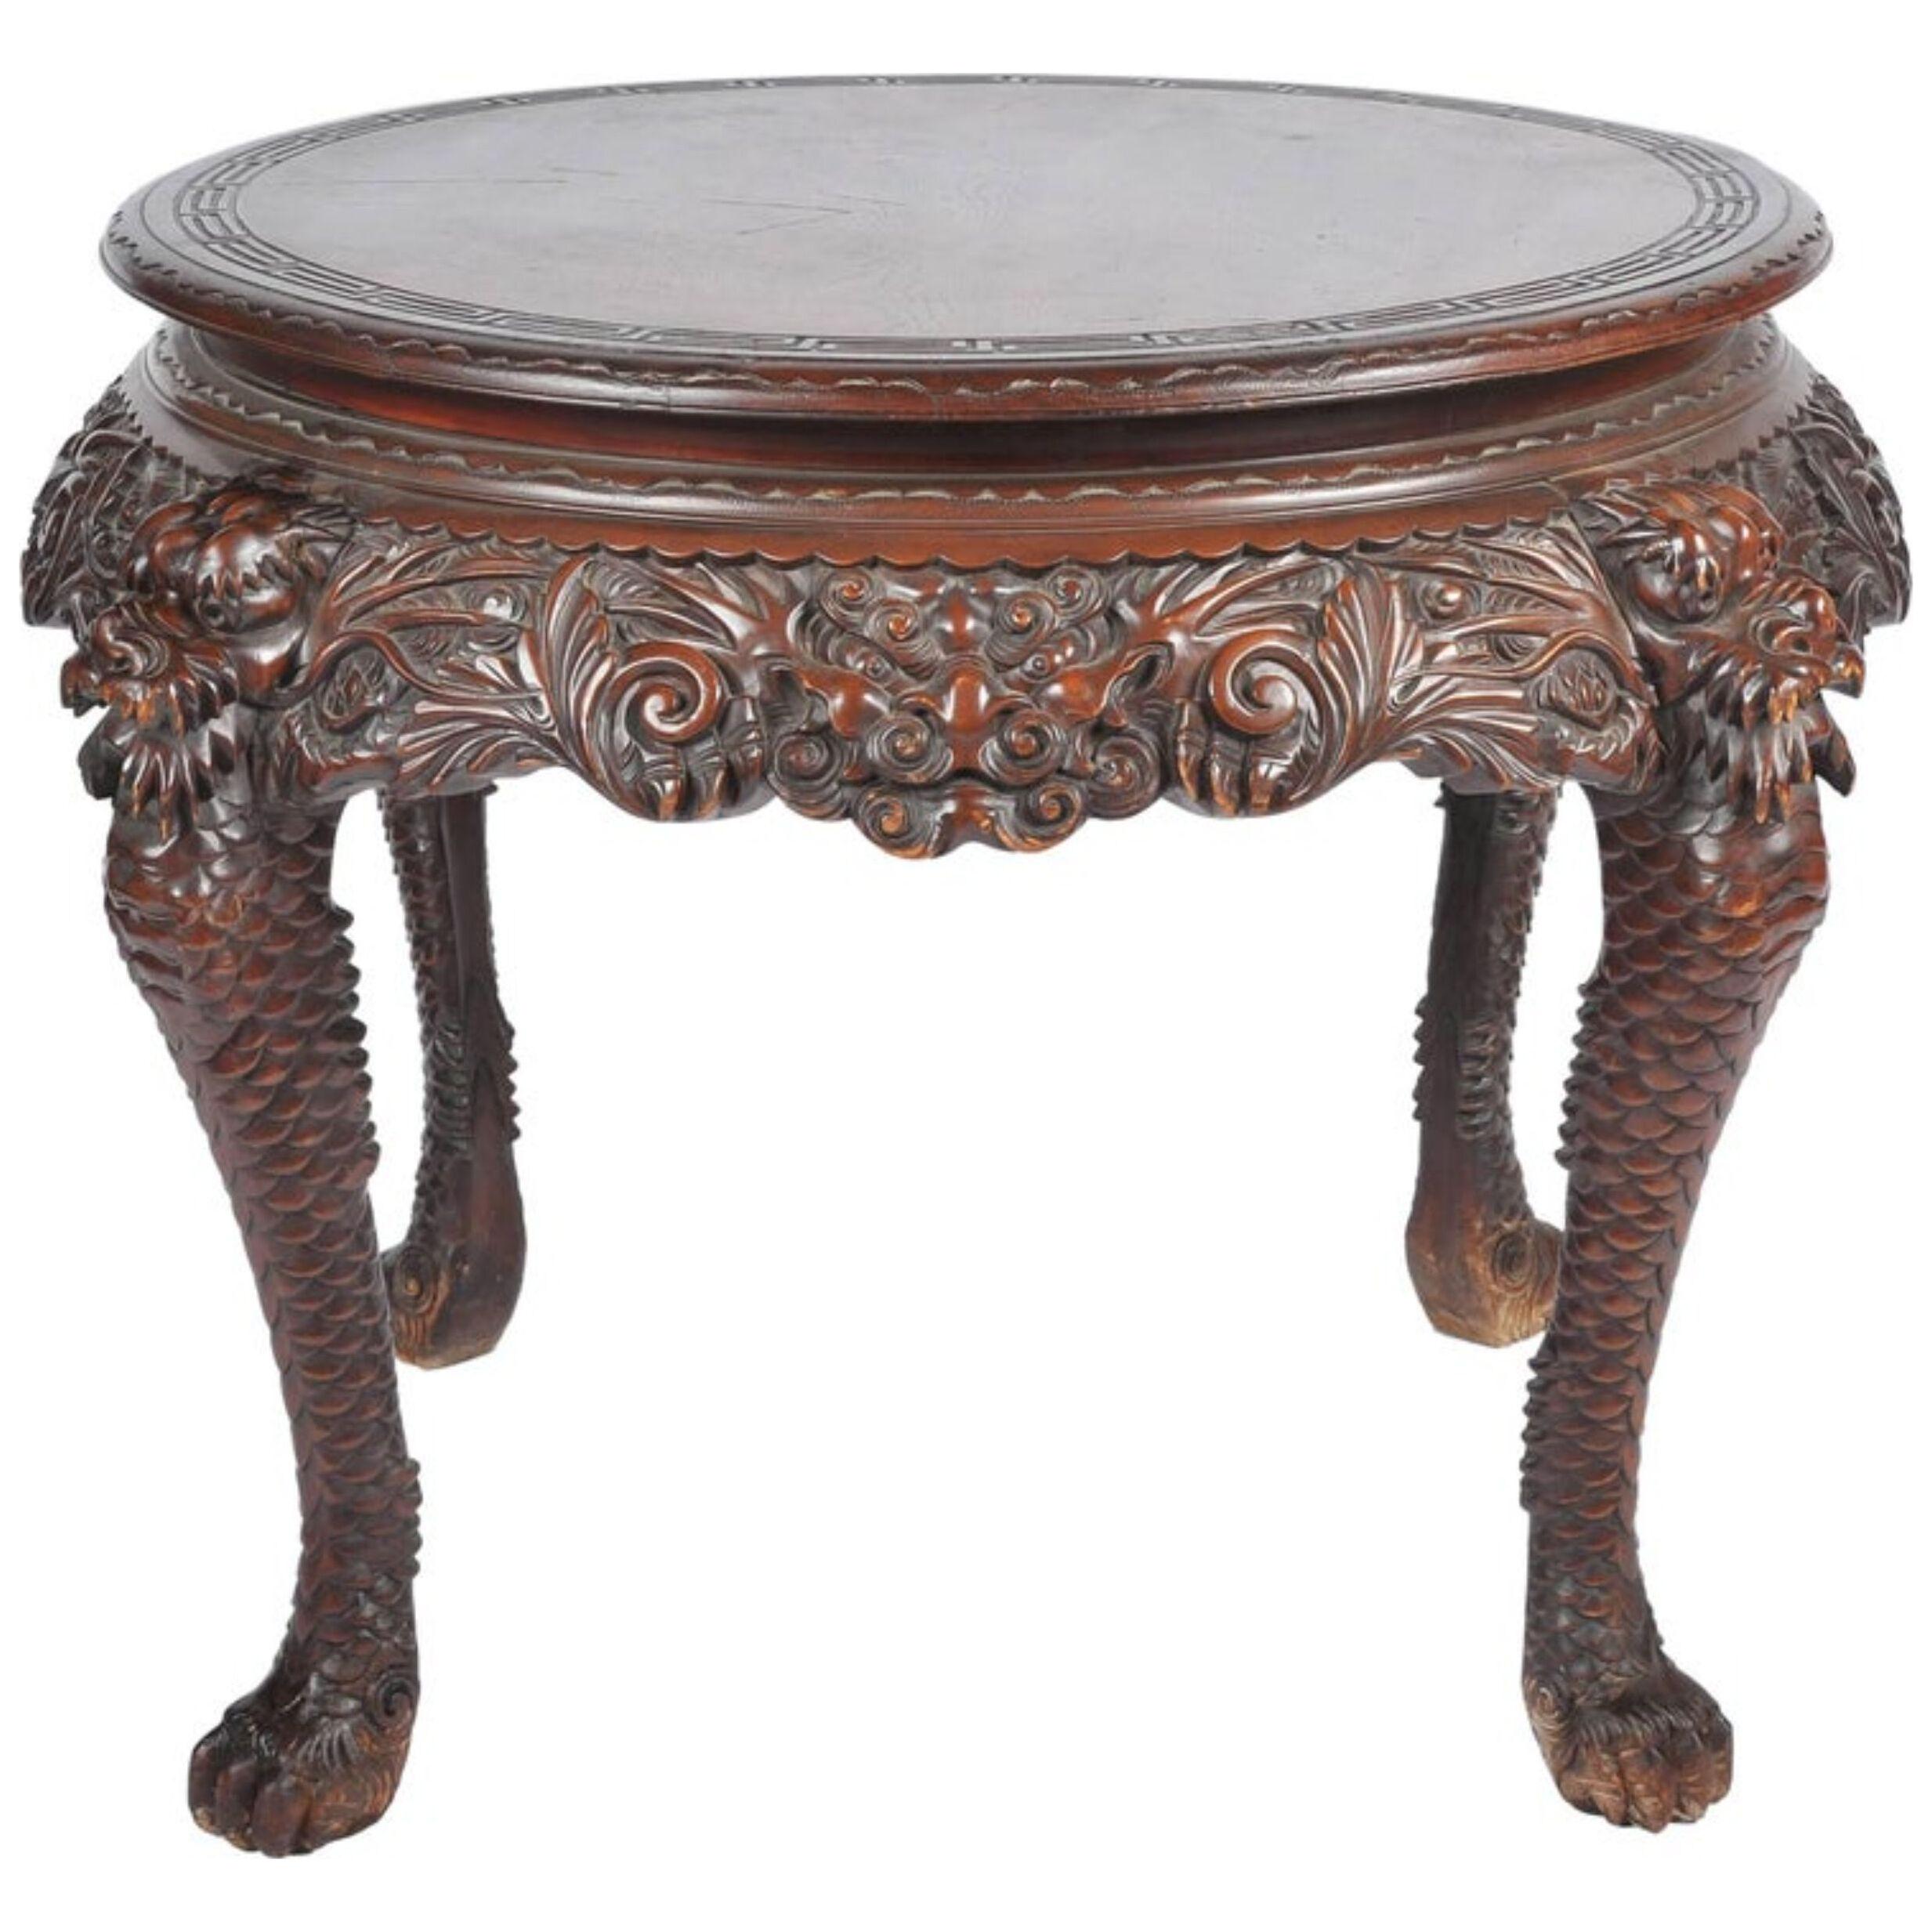 Oriental Carved Centre Table, 19th Century